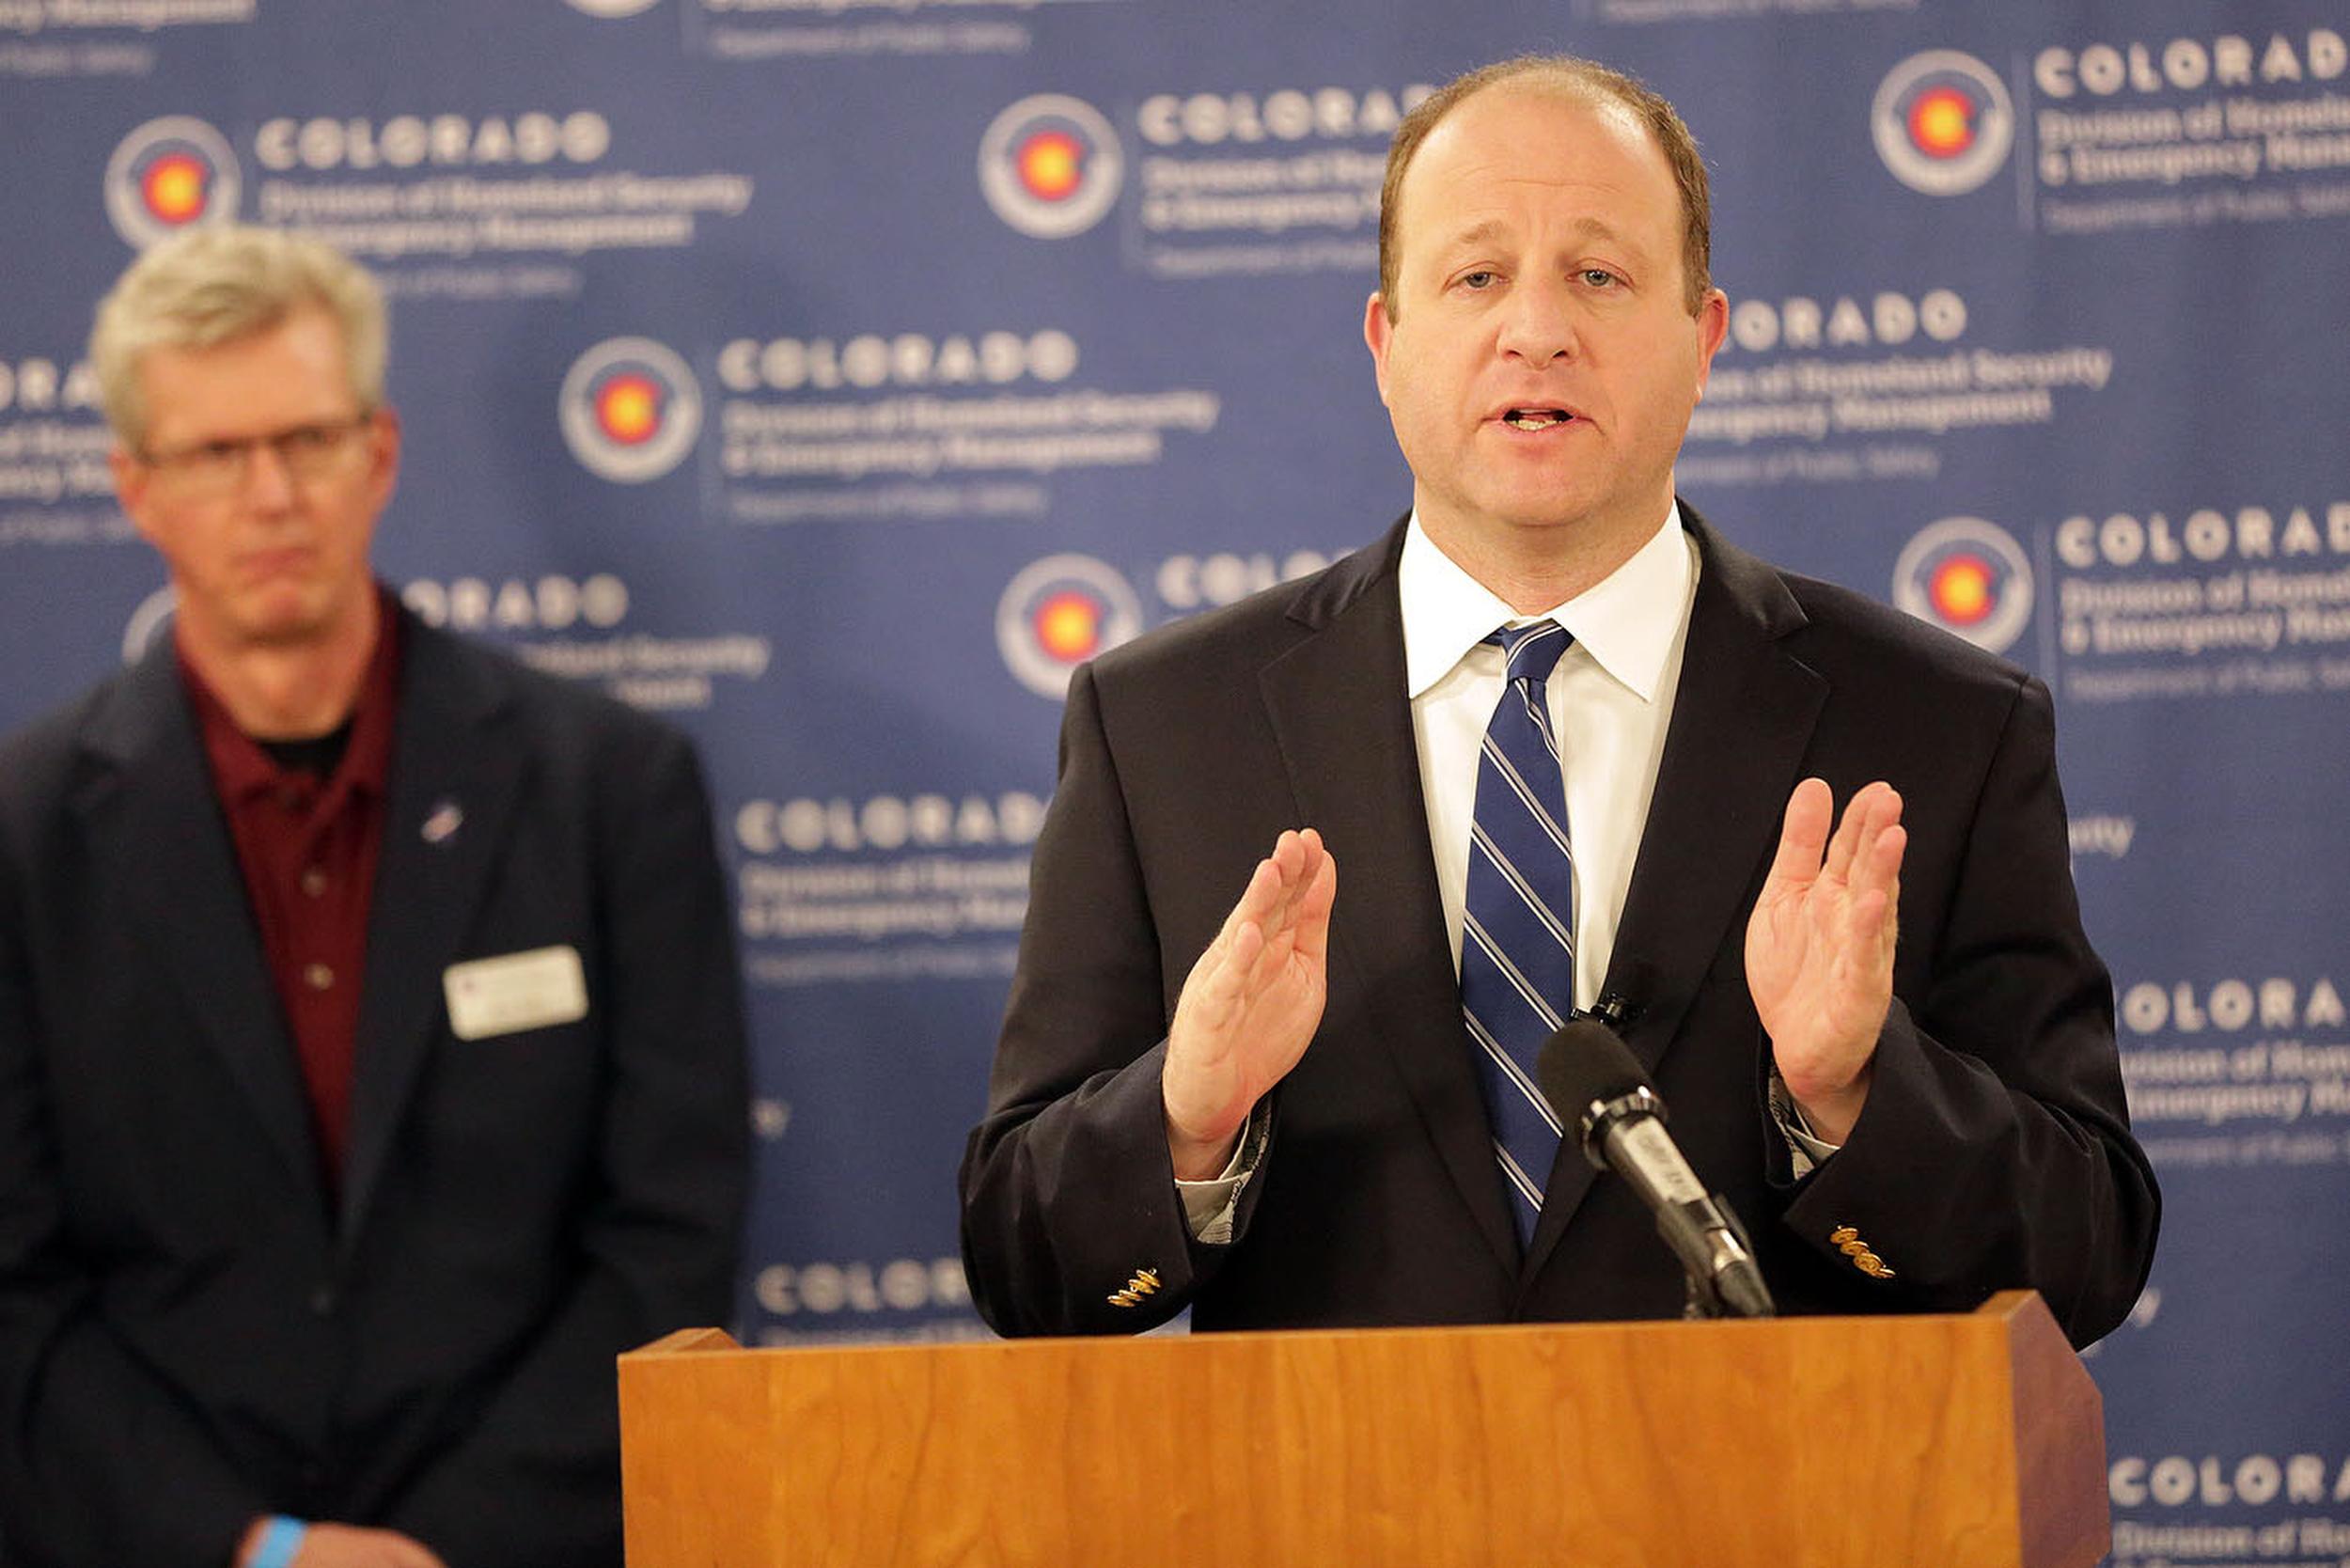 Colorado Gov. Jared Polis gestures during a press conference on March 25